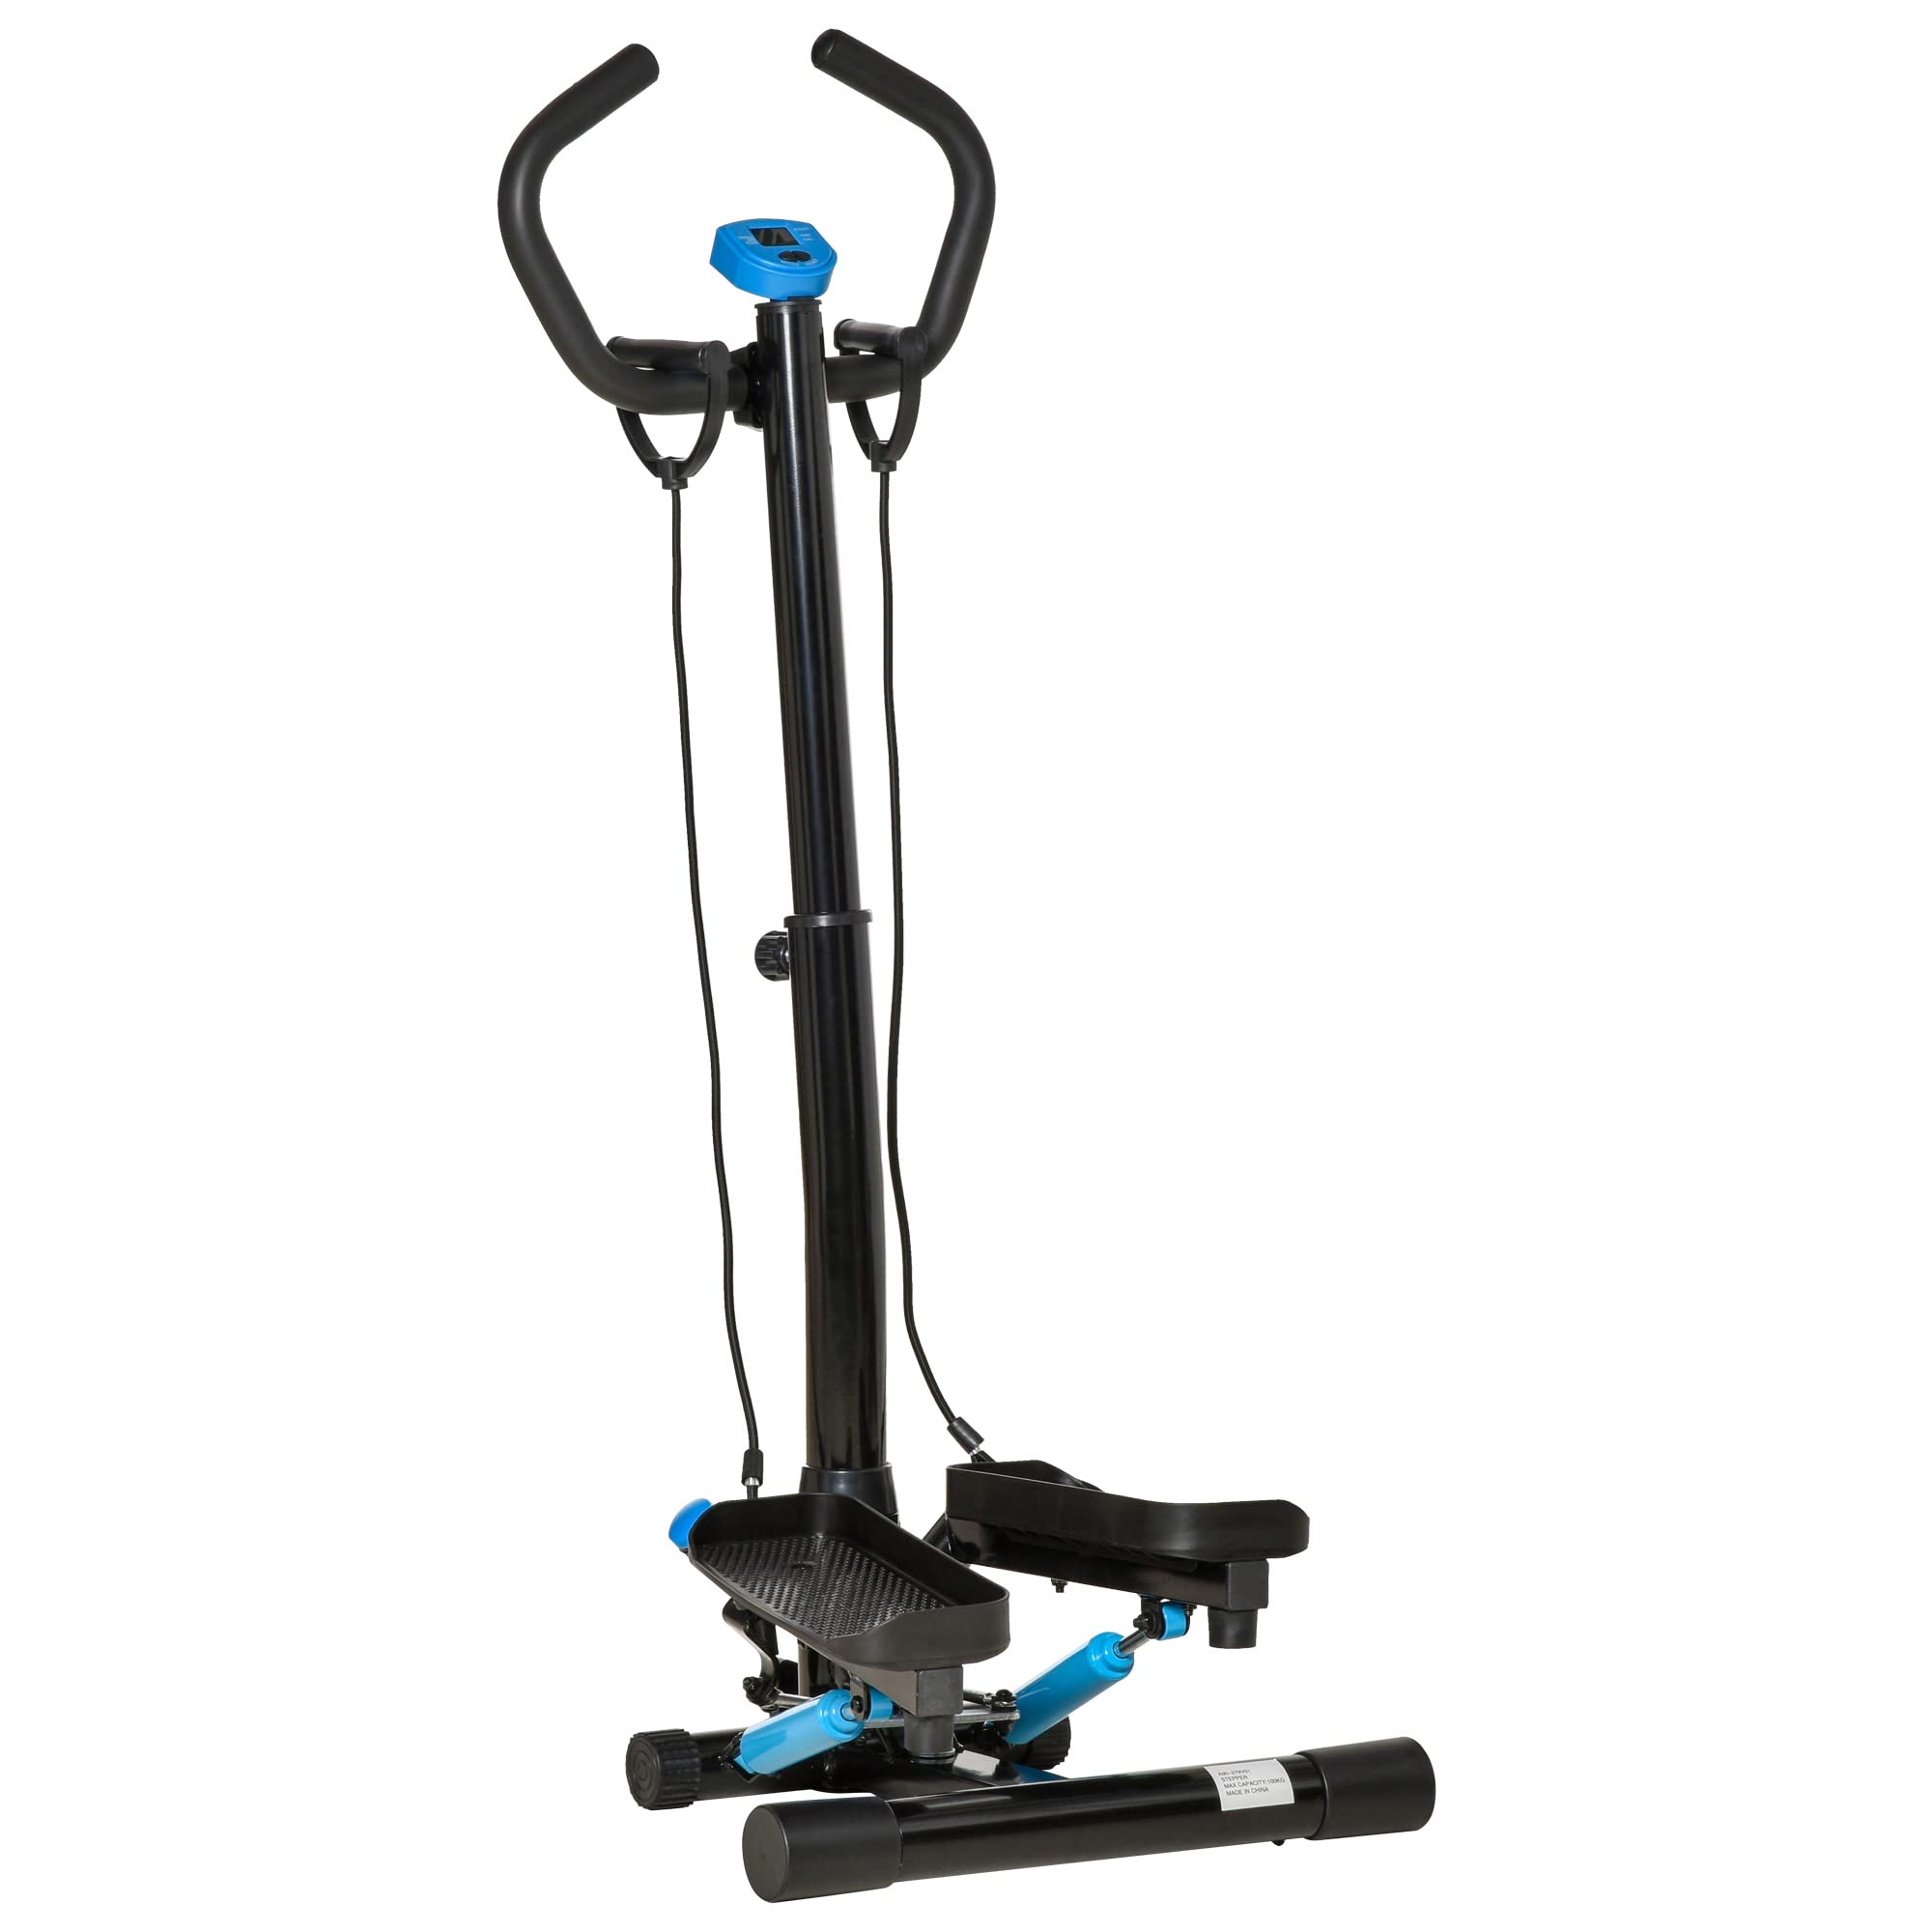 Soozier Twist Stepper Machine with Resistance Bands, Adjustable Workout Fitness Equipment with Handle Bar and LcD Display for Ho